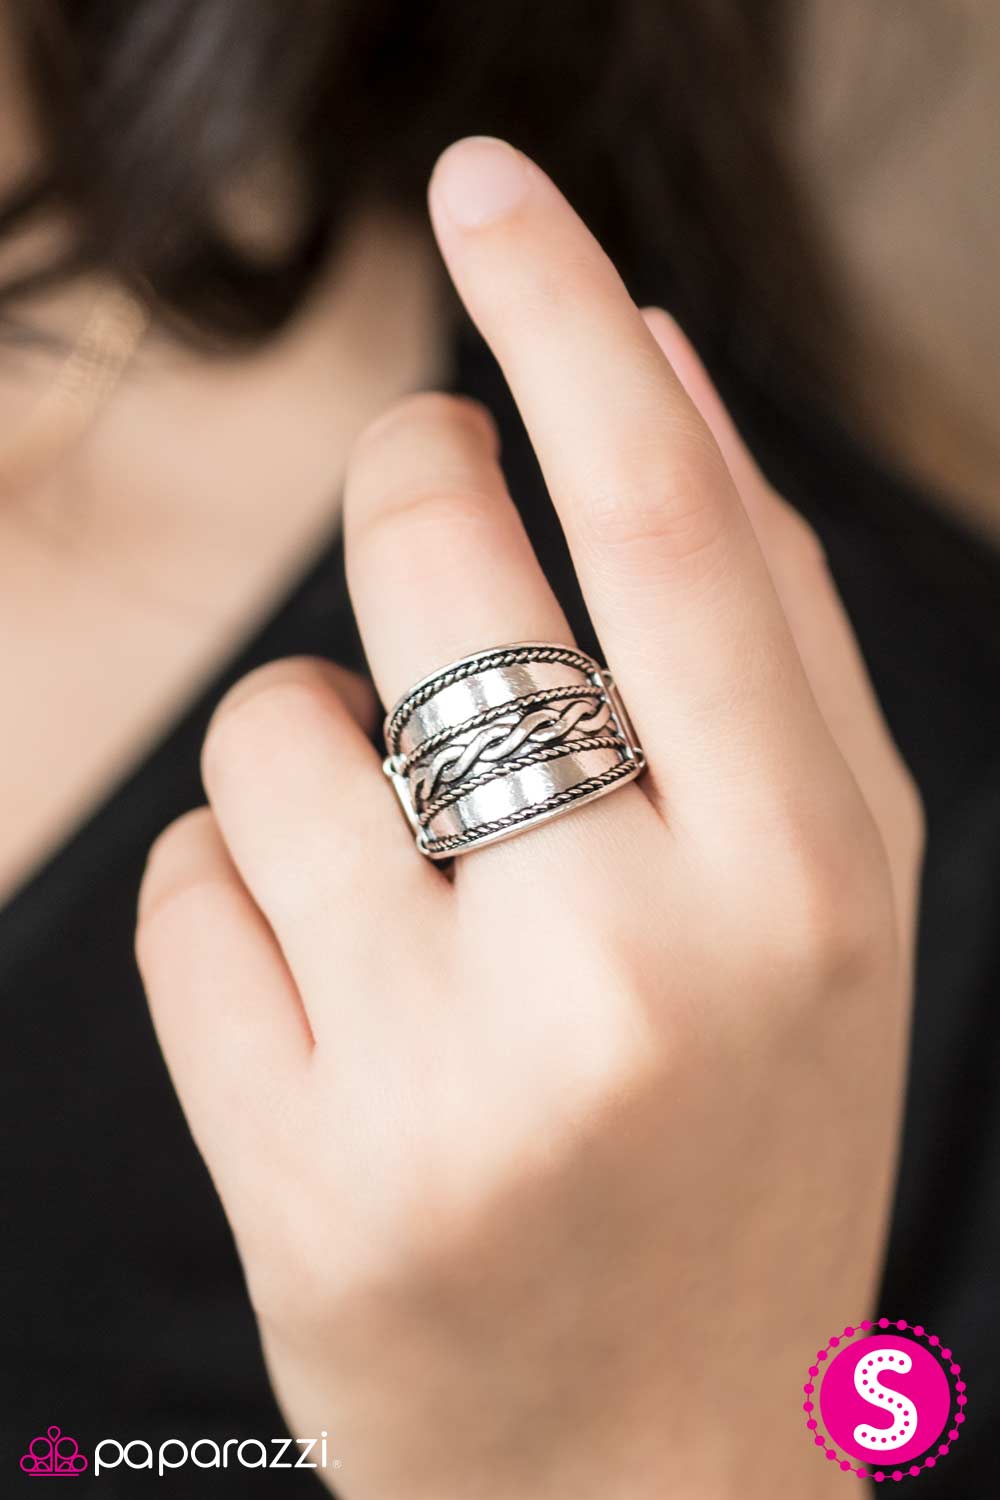 Find Your Adventure - Silver - Paparazzi ring